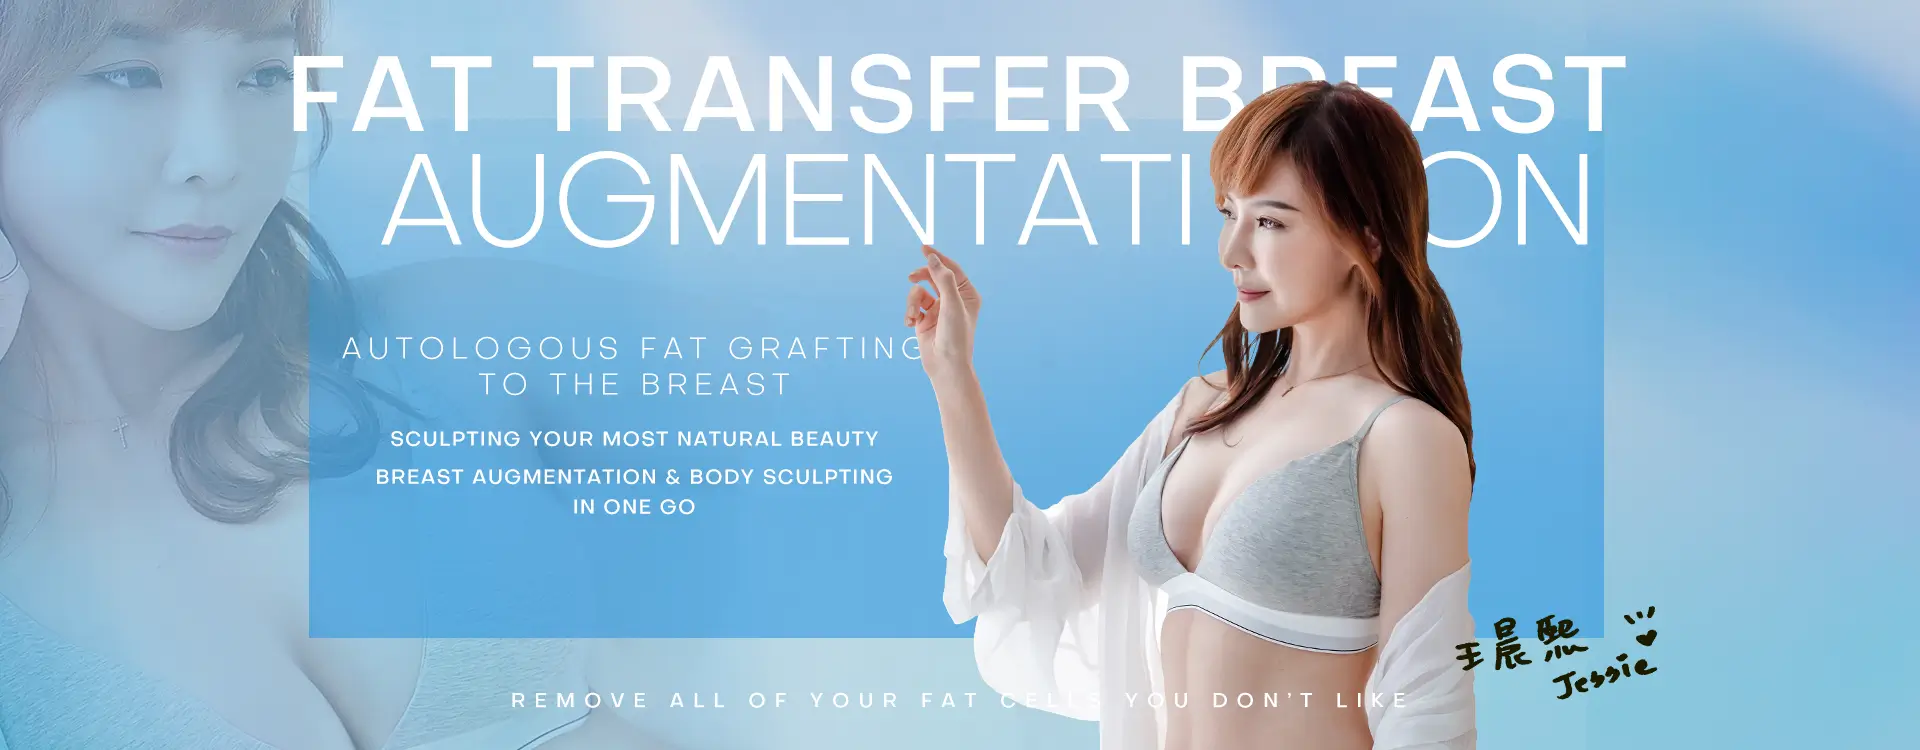 Fat Transfer Breast Augmentation (Autologous fat grafting to the breast)